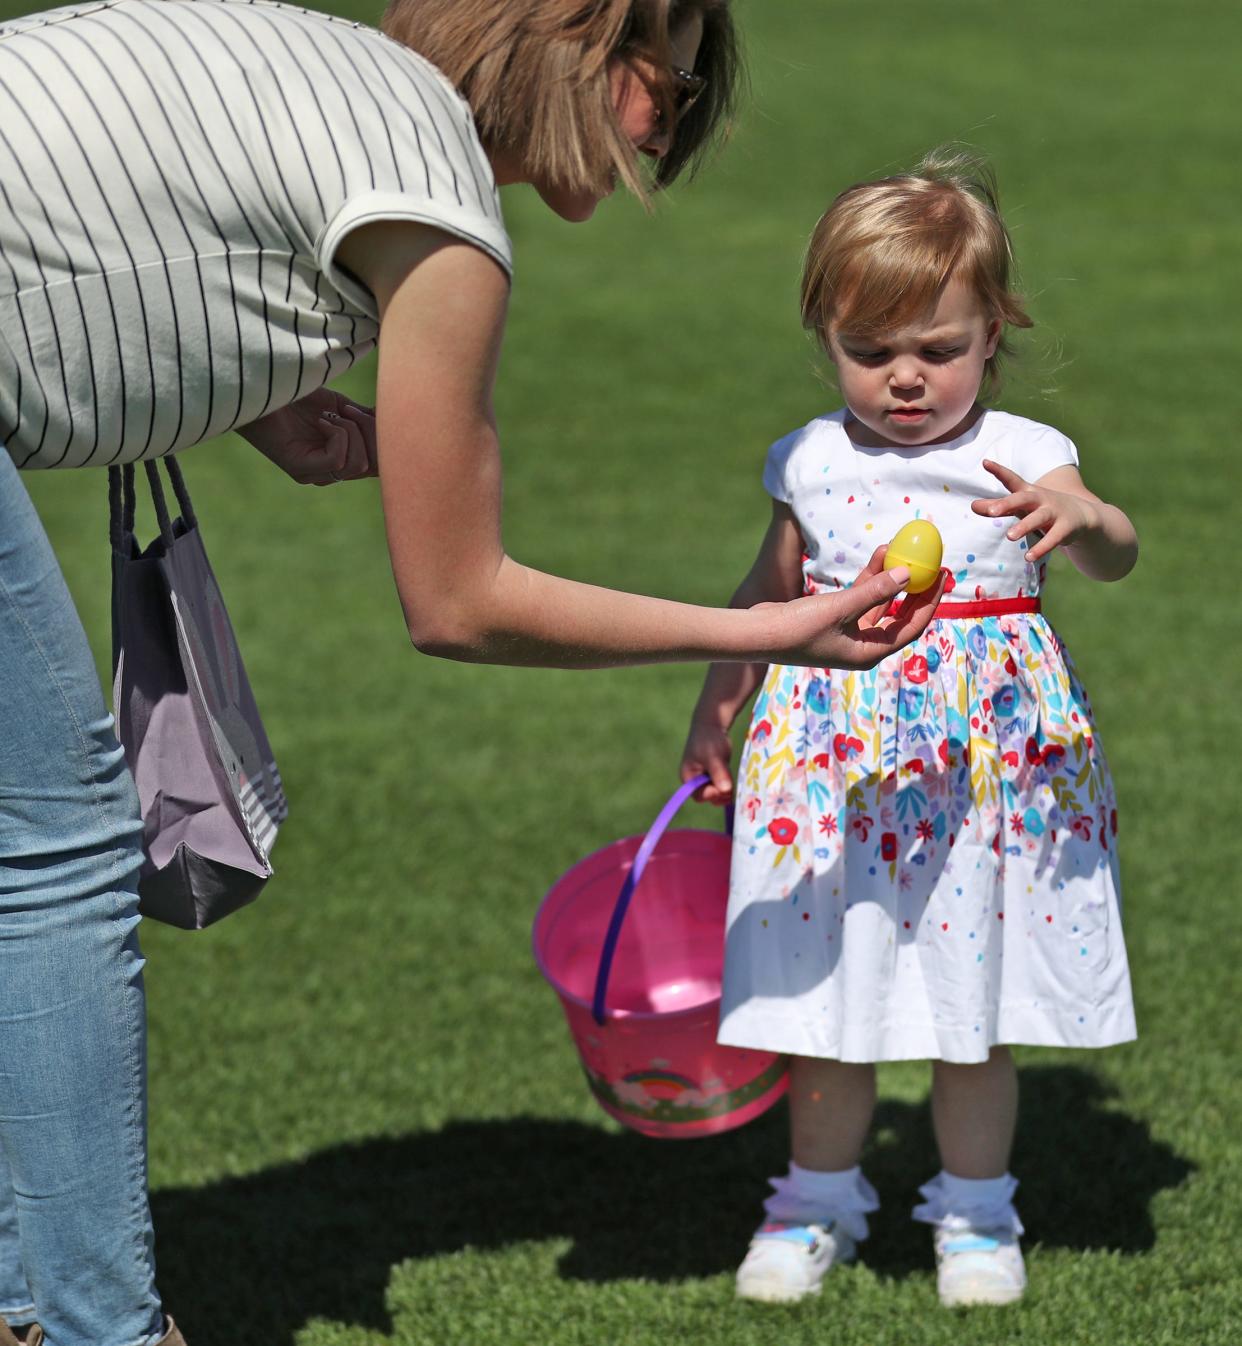 Kylie Kinder shows one of the eggs her daughter Lilly Kinder found during an Easter egg hunt in the outfield at Victory Field, Sunday, April  21, 2019.